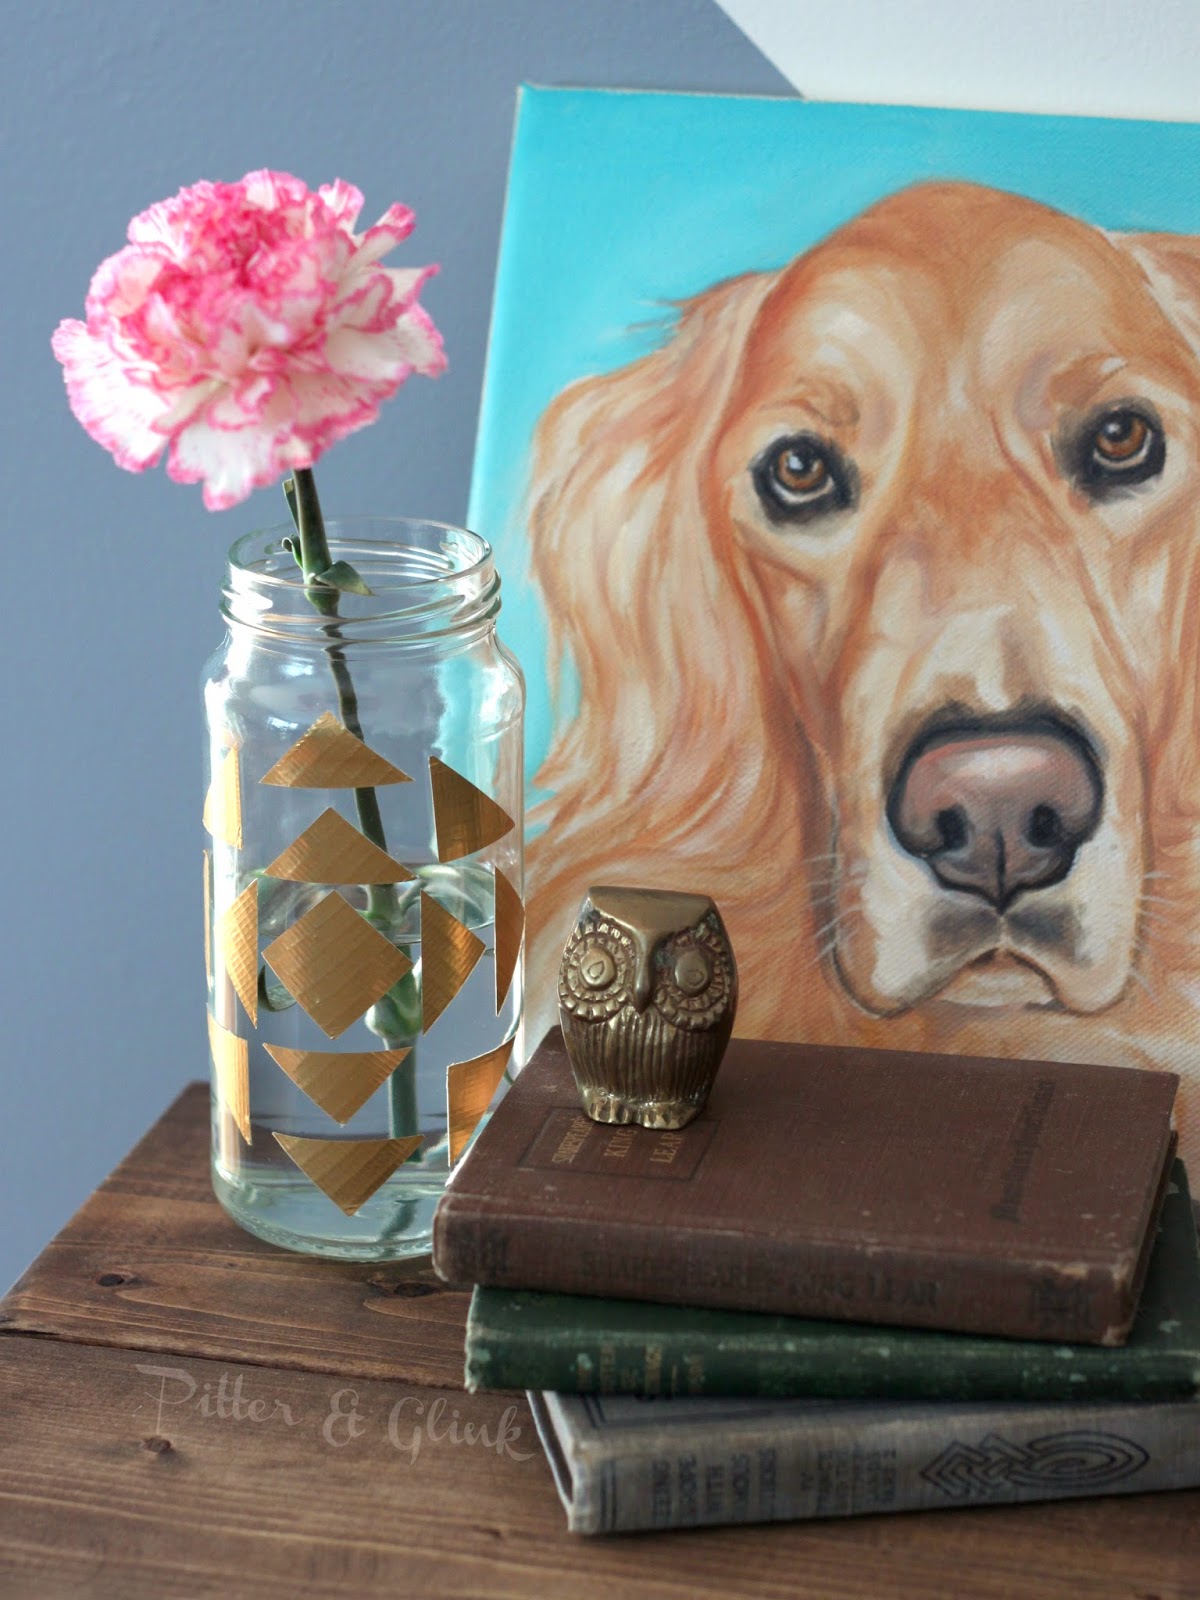 Create a trendy geometric print vase using a recycled glass jar and Duck tape! PitterandGlink.com